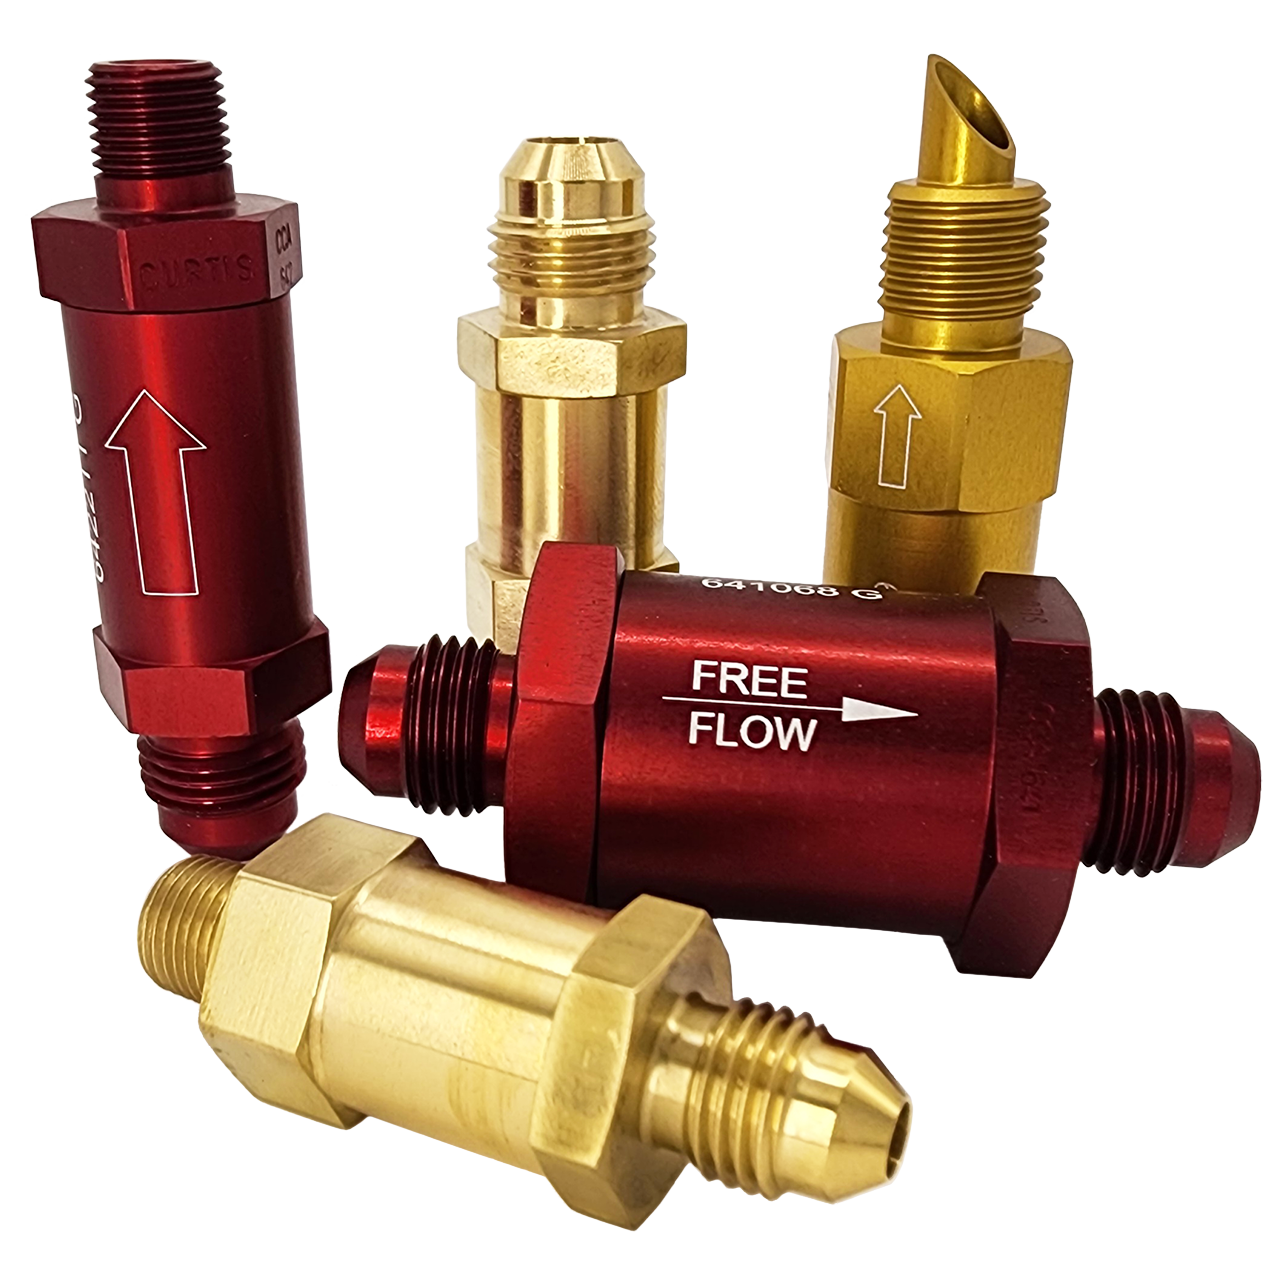 Curtis-Valves-Check-Flapper-Free-Flow-Oil-Drain-Valve-Grouping-aircraft-engine-components